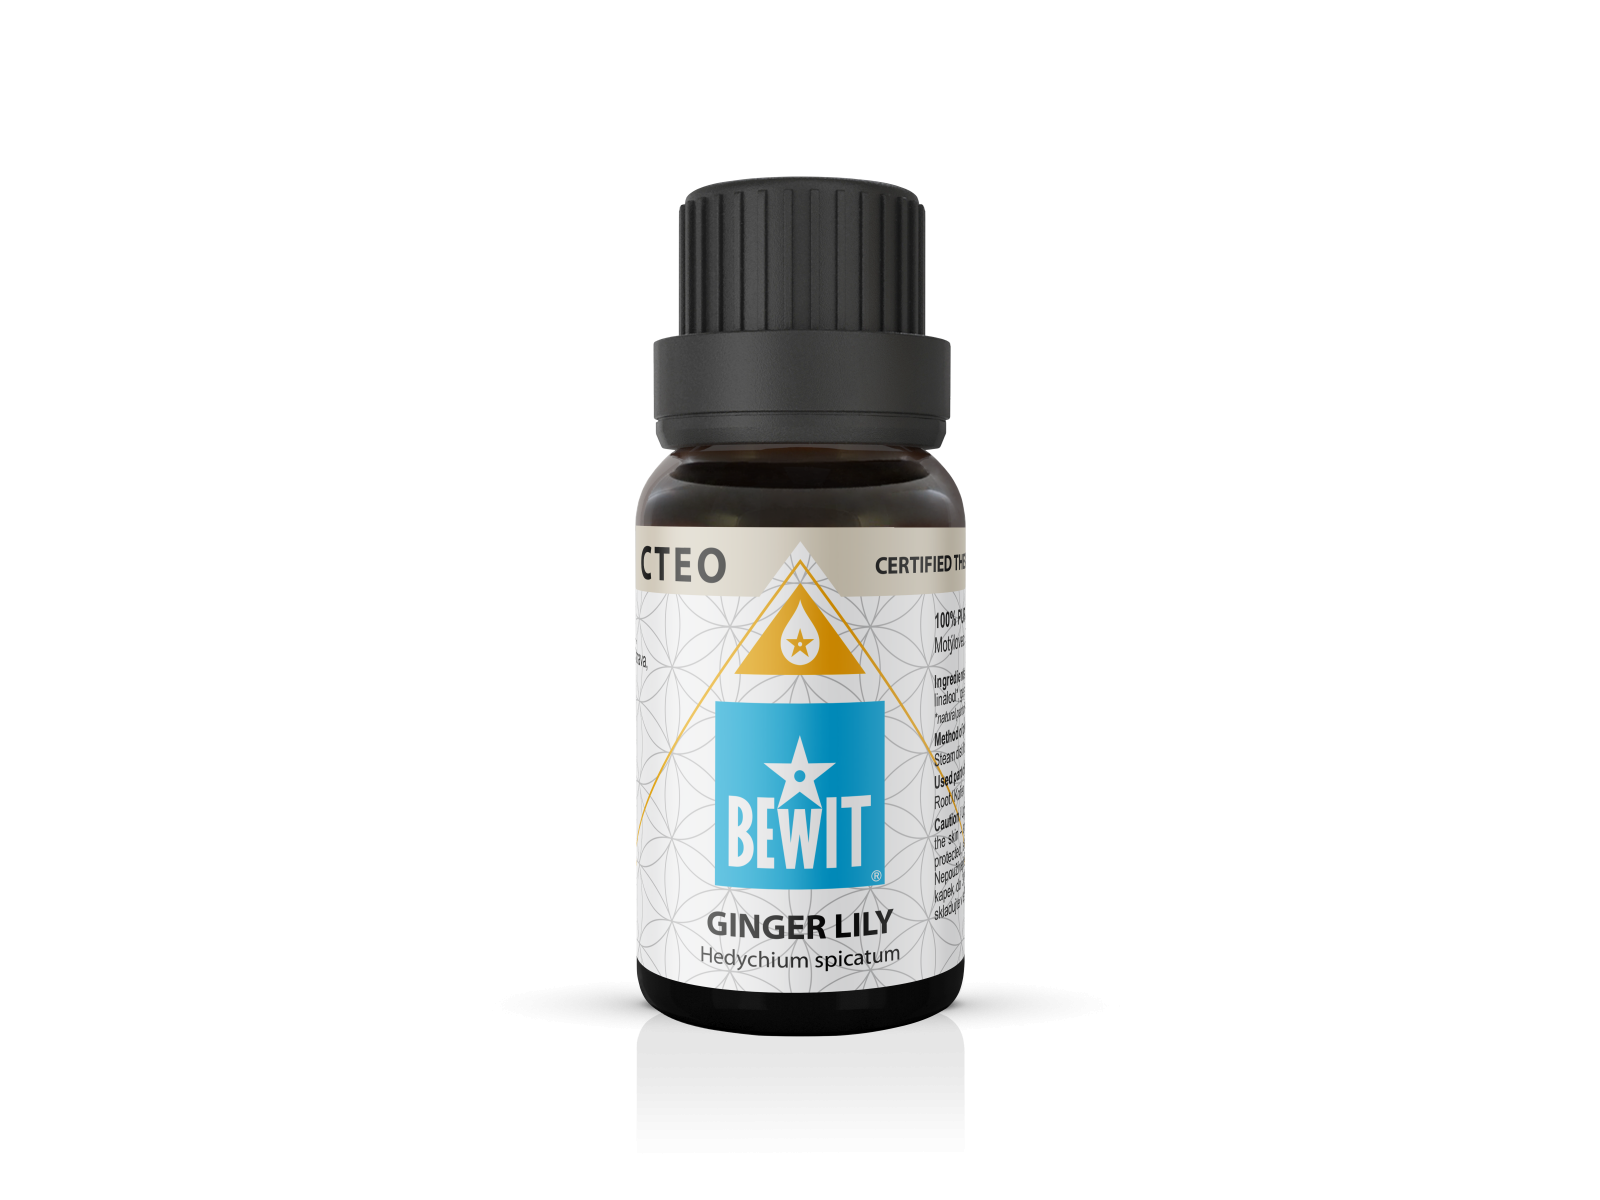 BEWIT Ginger Lily - 100% pure essential oil - 3